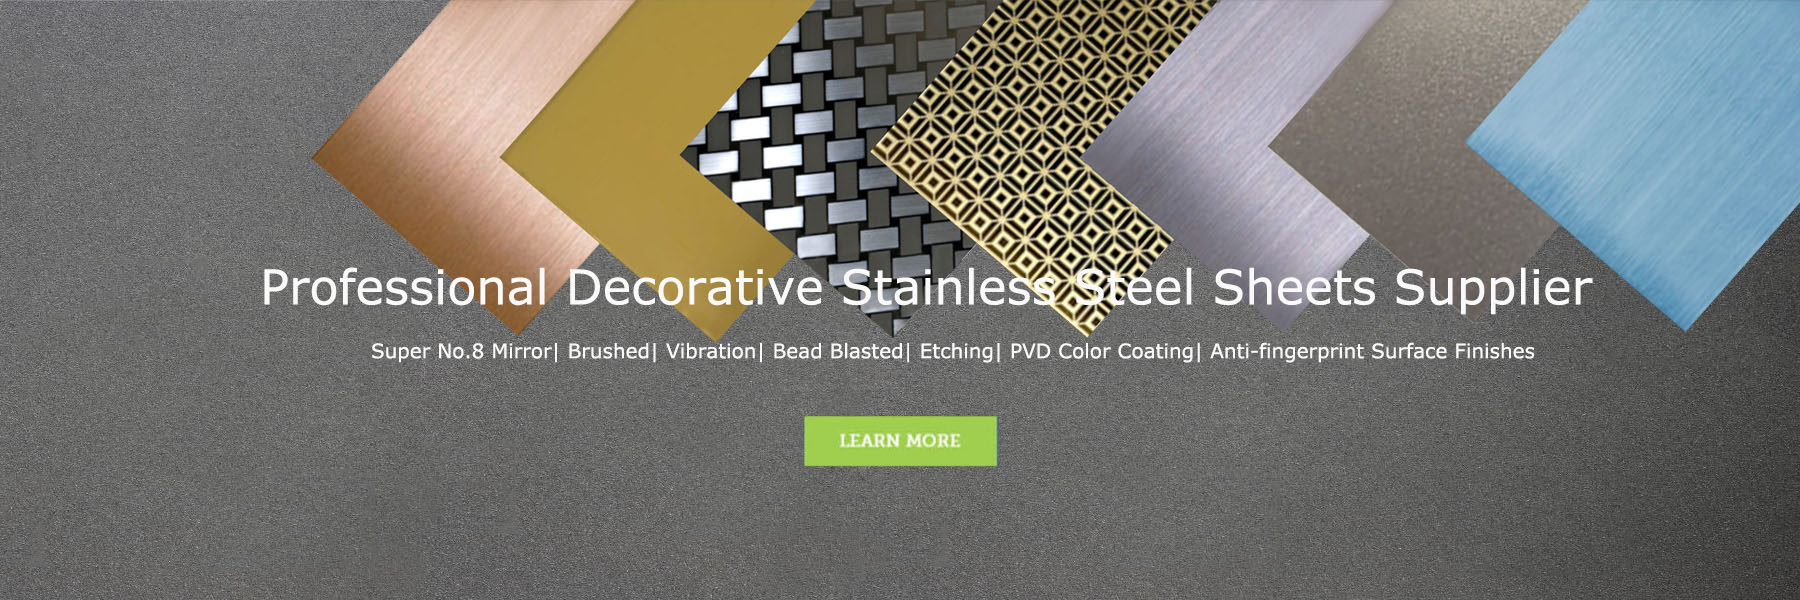 Decorative Stainless Steel Sheets Supplier